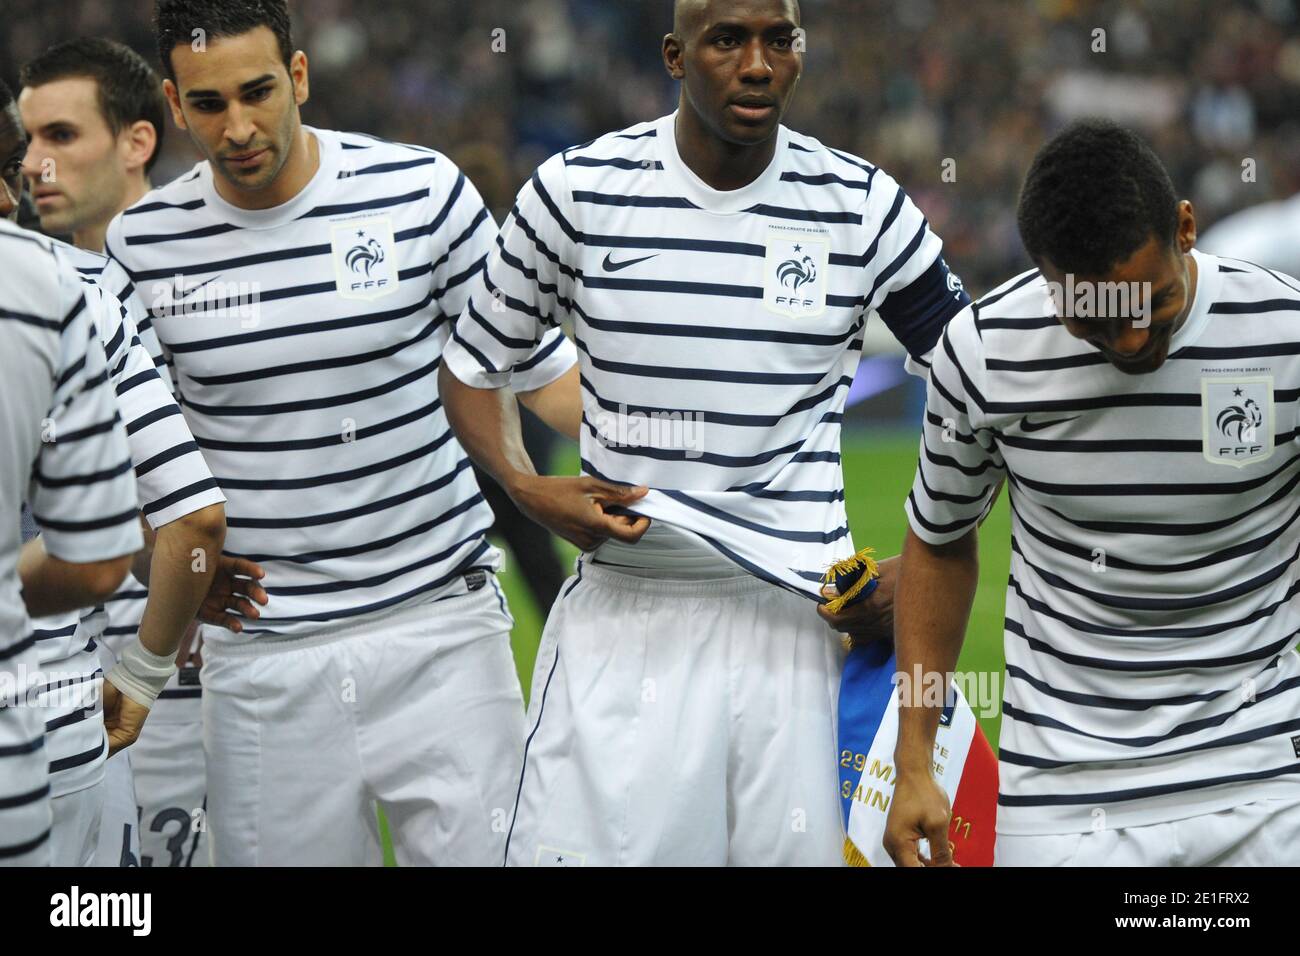 France's National Players Adil Rami, Alou Diarra and Florent Malouda during  a International Friendly soccer match, France vs Croatia at Stade de France  in Saint-Denis near Paris, France on March 29, 2011.